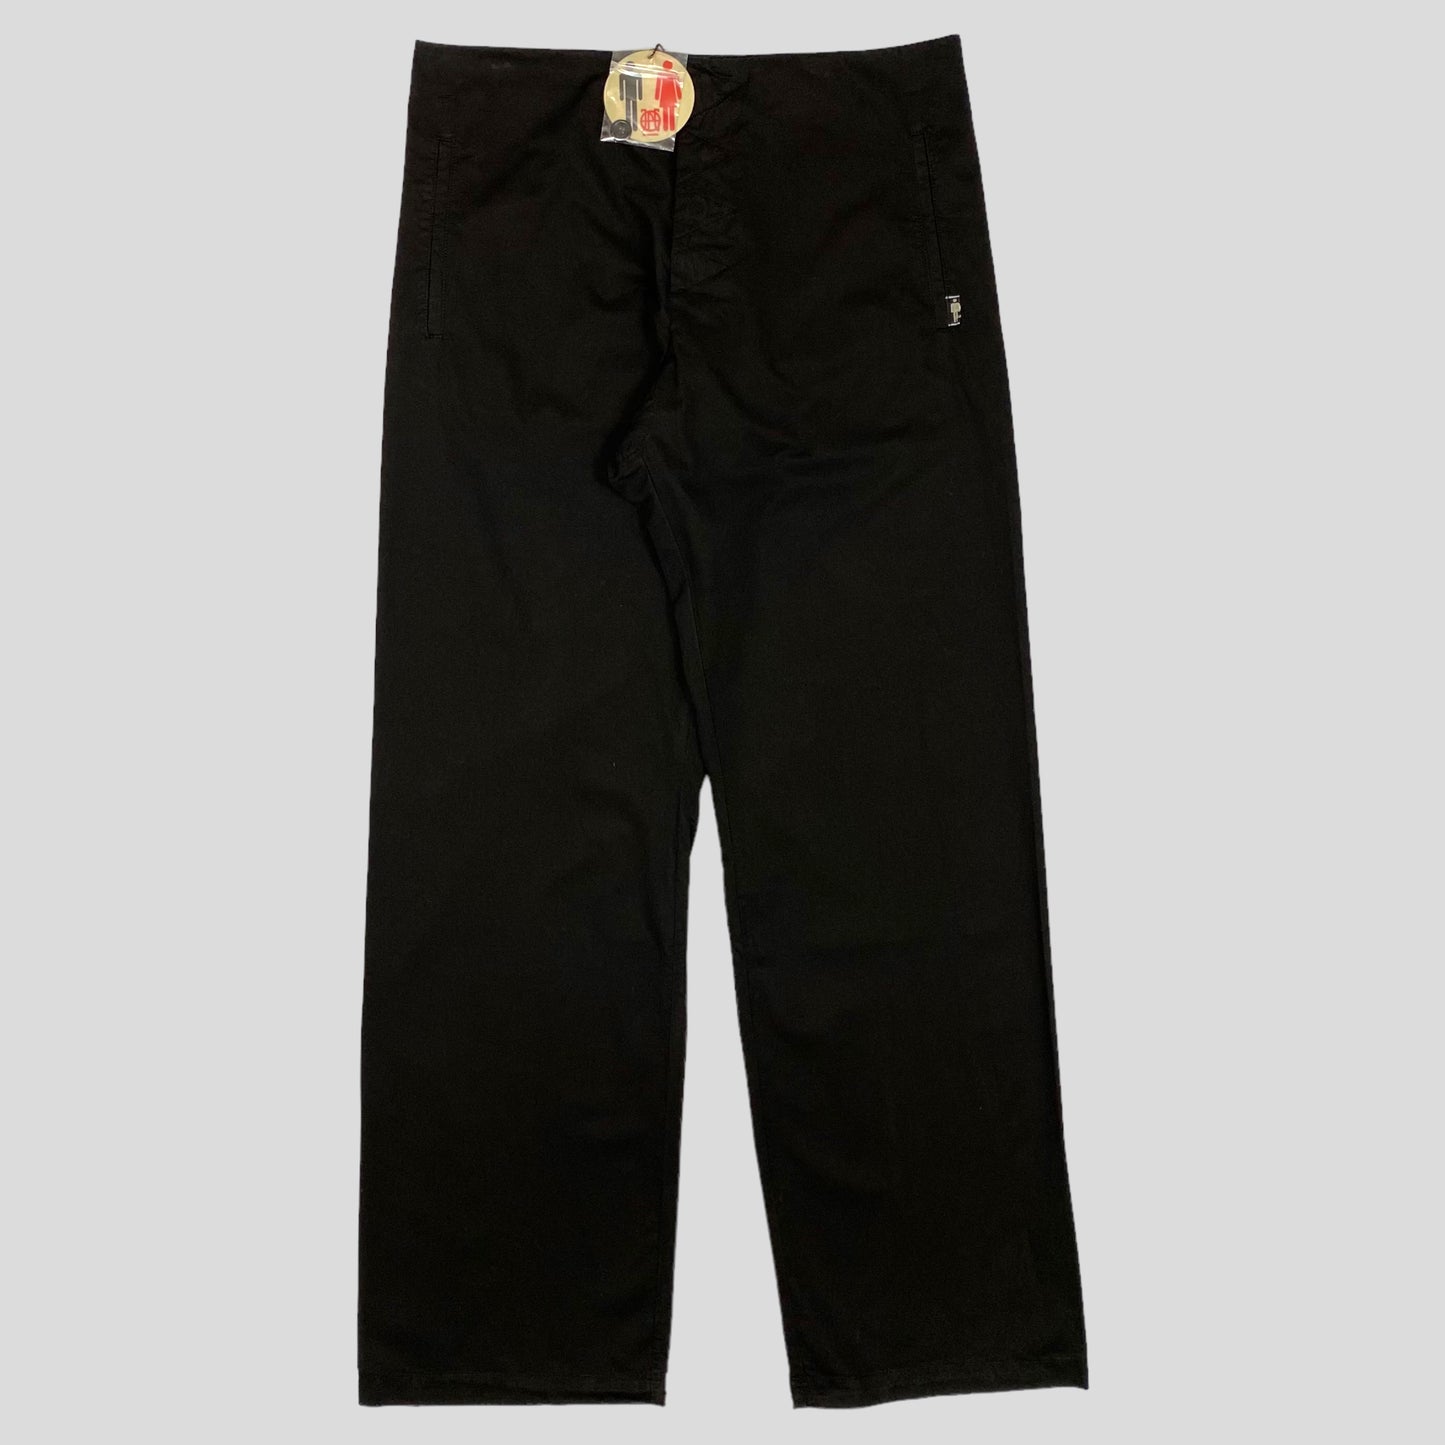 JPG 90’s Baggy Cotton Trousers - 38